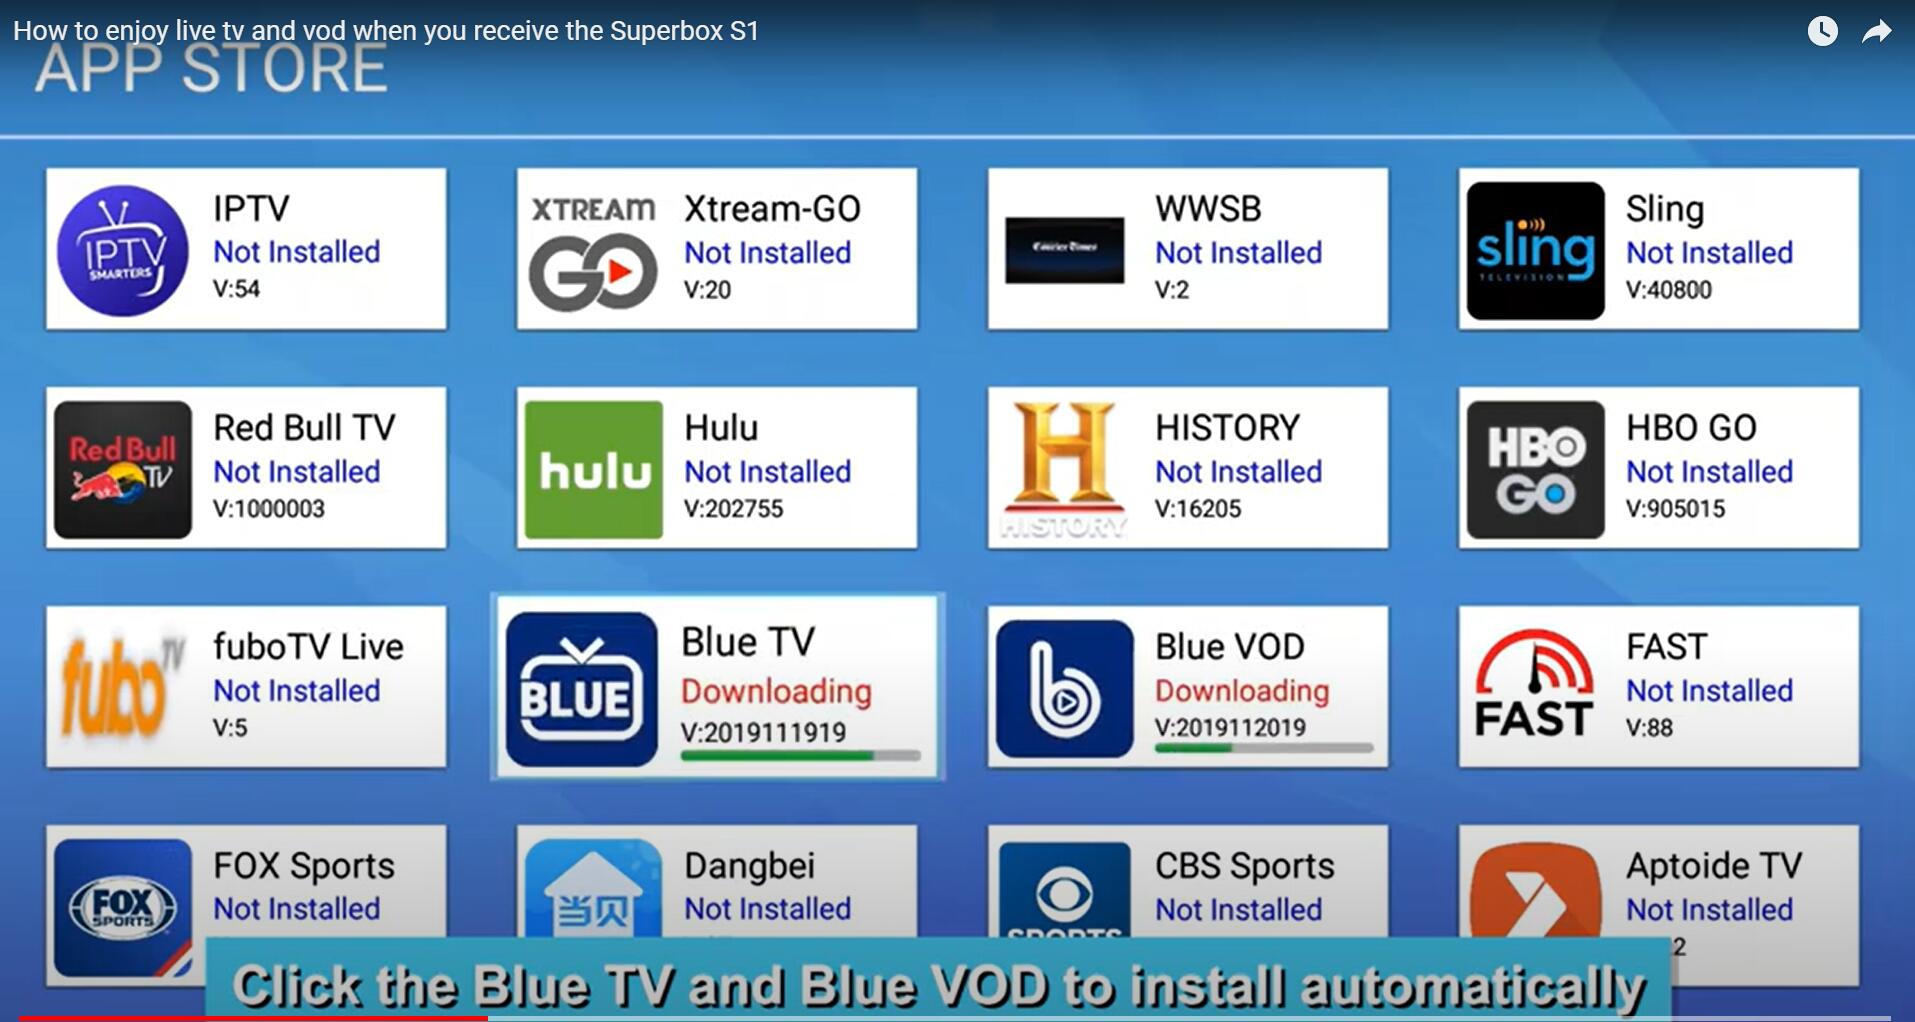 How to Enjoy Live TV and VOD When You Receive the SuperBox S1?